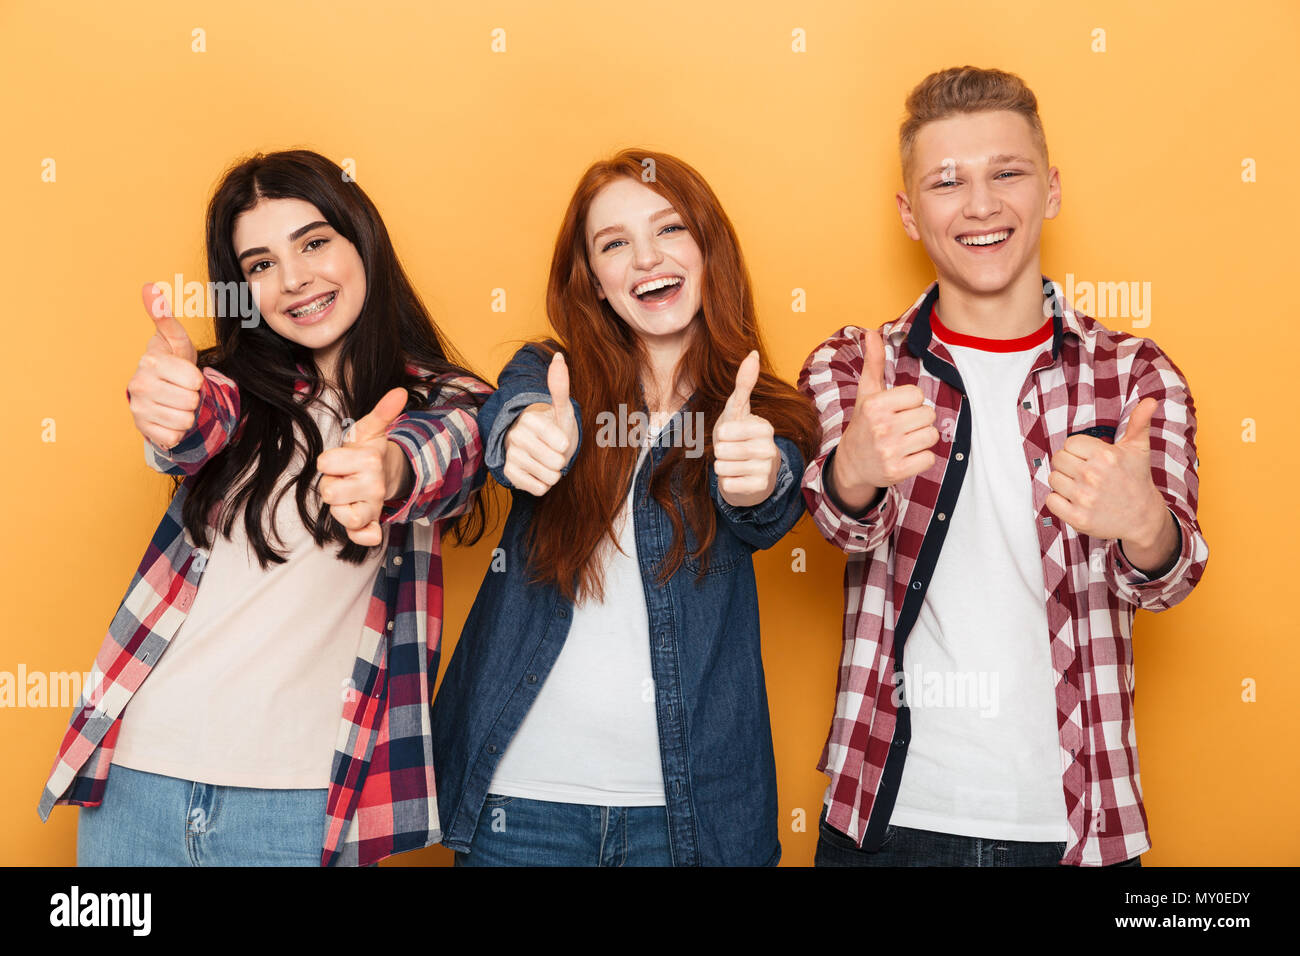 Group of cheerful school friends showing thumbs up while standing together over yellow background Stock Photo